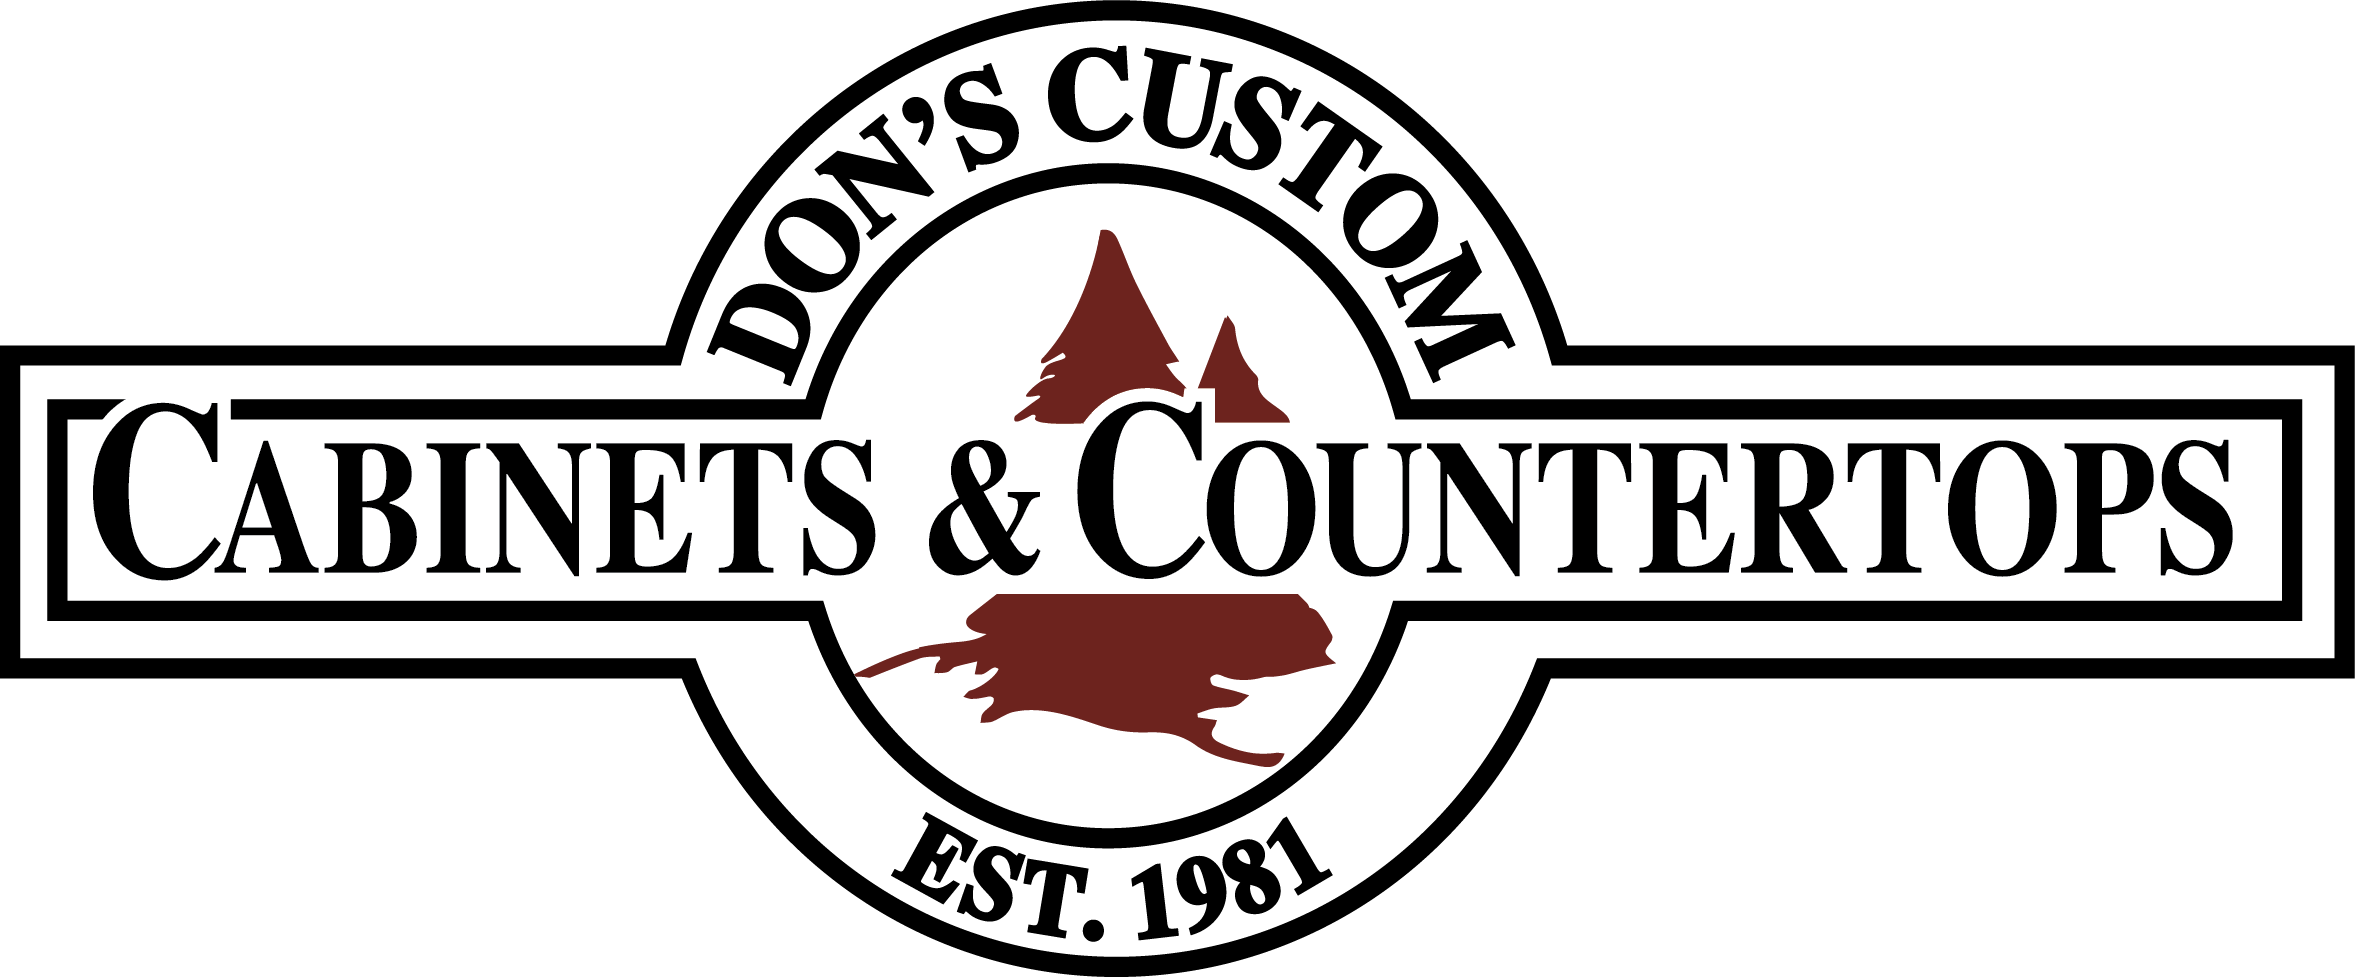 dons custom countertops and home improvement